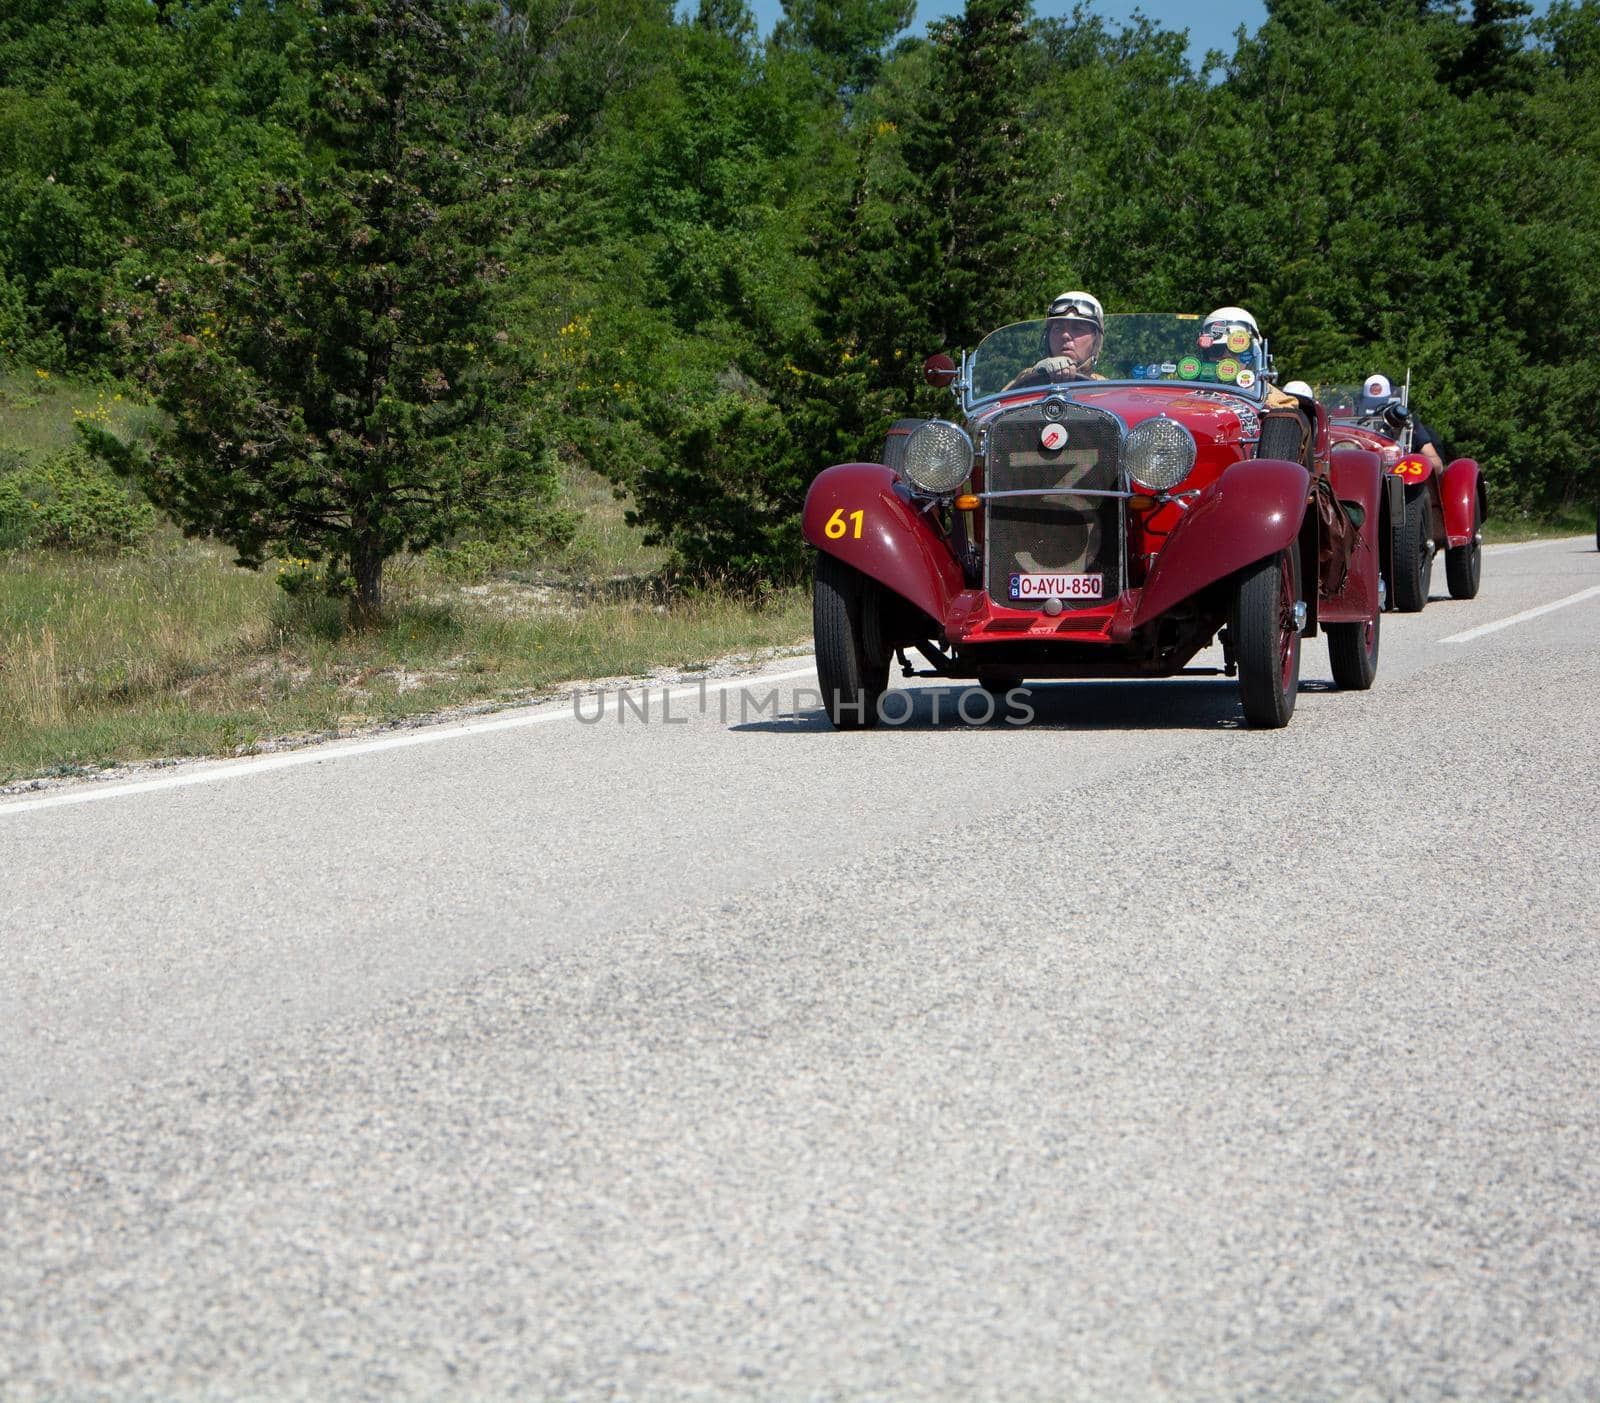 URBINO - ITALY - JUN 16 - 2022 : fiat on an old racing car in rally Mille Miglia 2022 the famous italian historical race (1927-1957